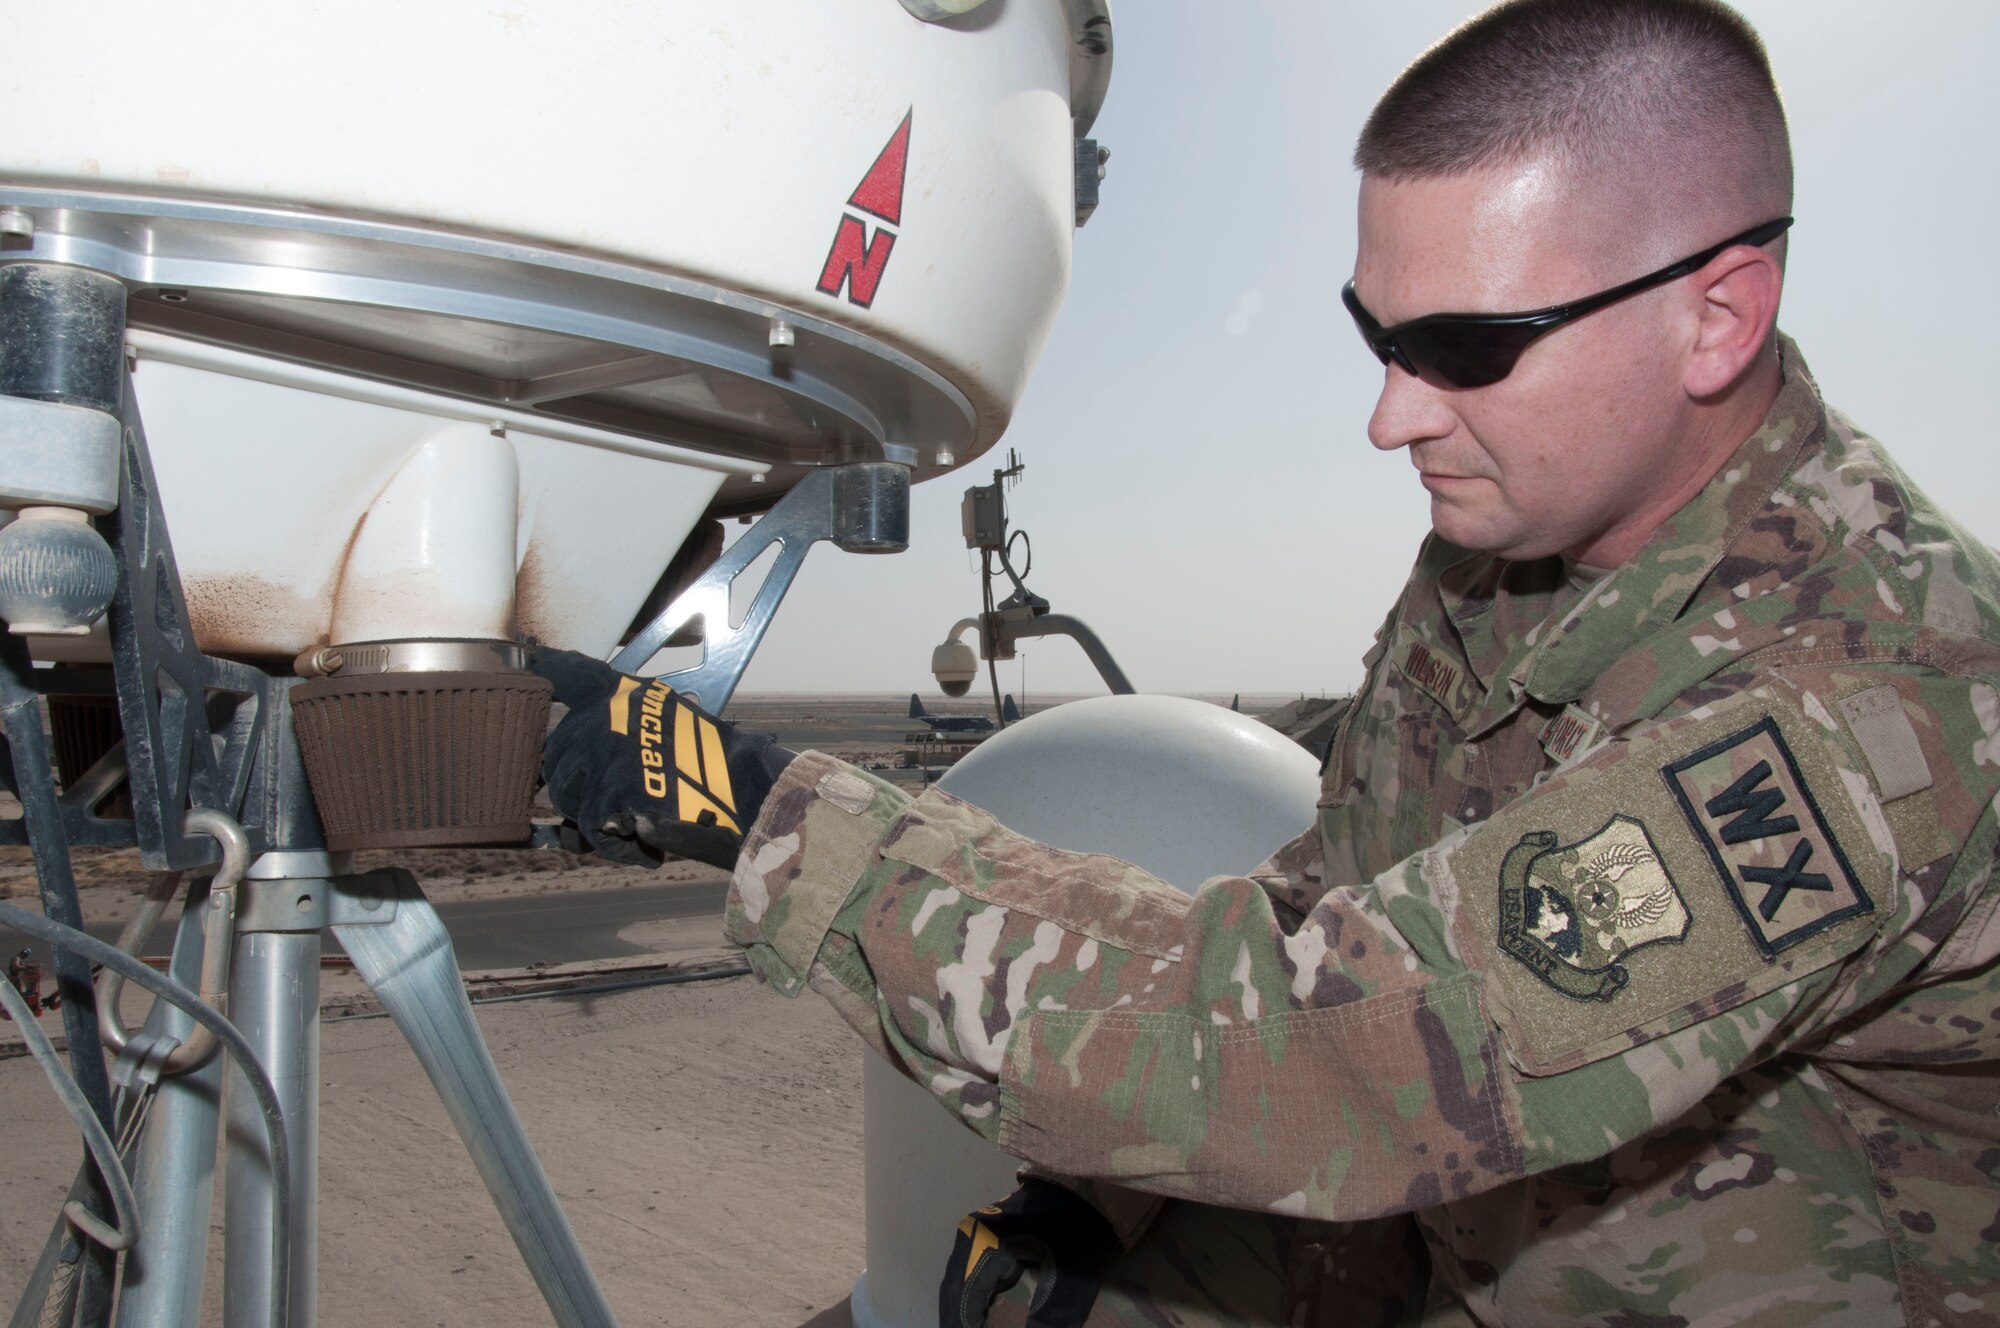 Tech. Sgt. Keith Wilson inspects dust filer of a portable Doppler radar unit during a preventative maintenance inspection at an undisclosed location in southwest Asia, June 11, 2017. Excessive dust inside the Doppler can cause the unit to overheat and possibly fail. (U.S. Air Force photo/Master Sgt. Eric M. Sharman)